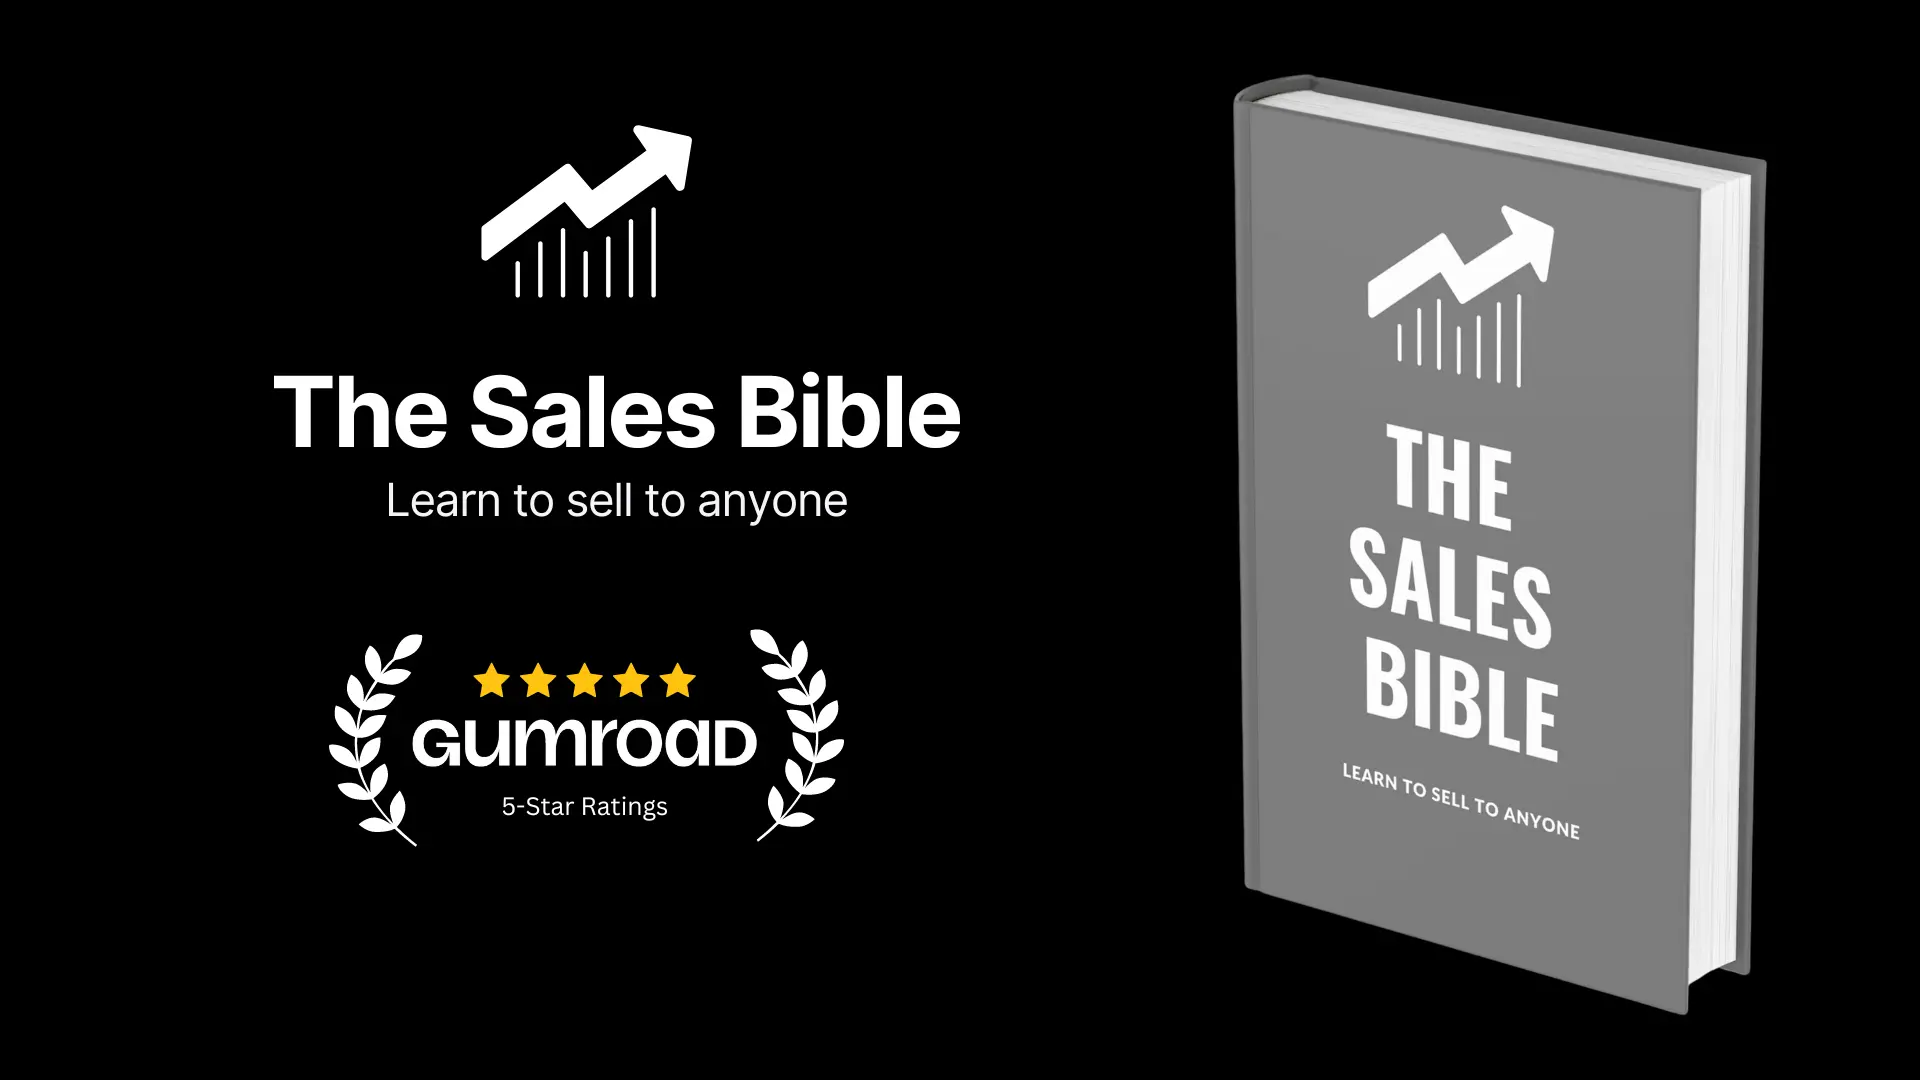 The Sales Bible image